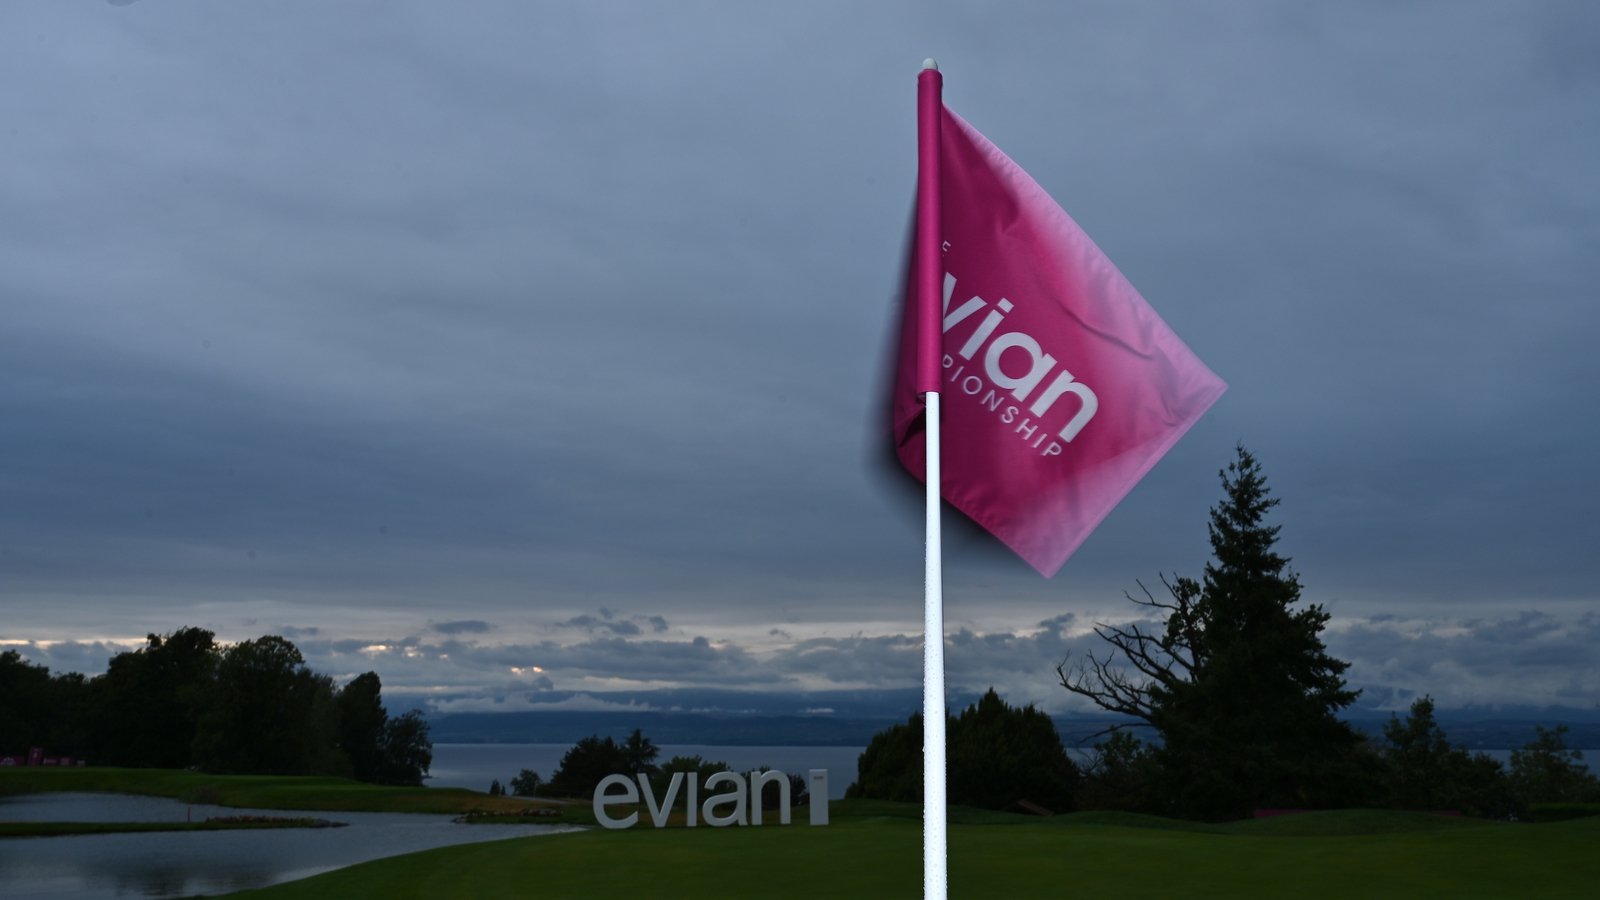 Evian Championship moves to week vacated by Olympics